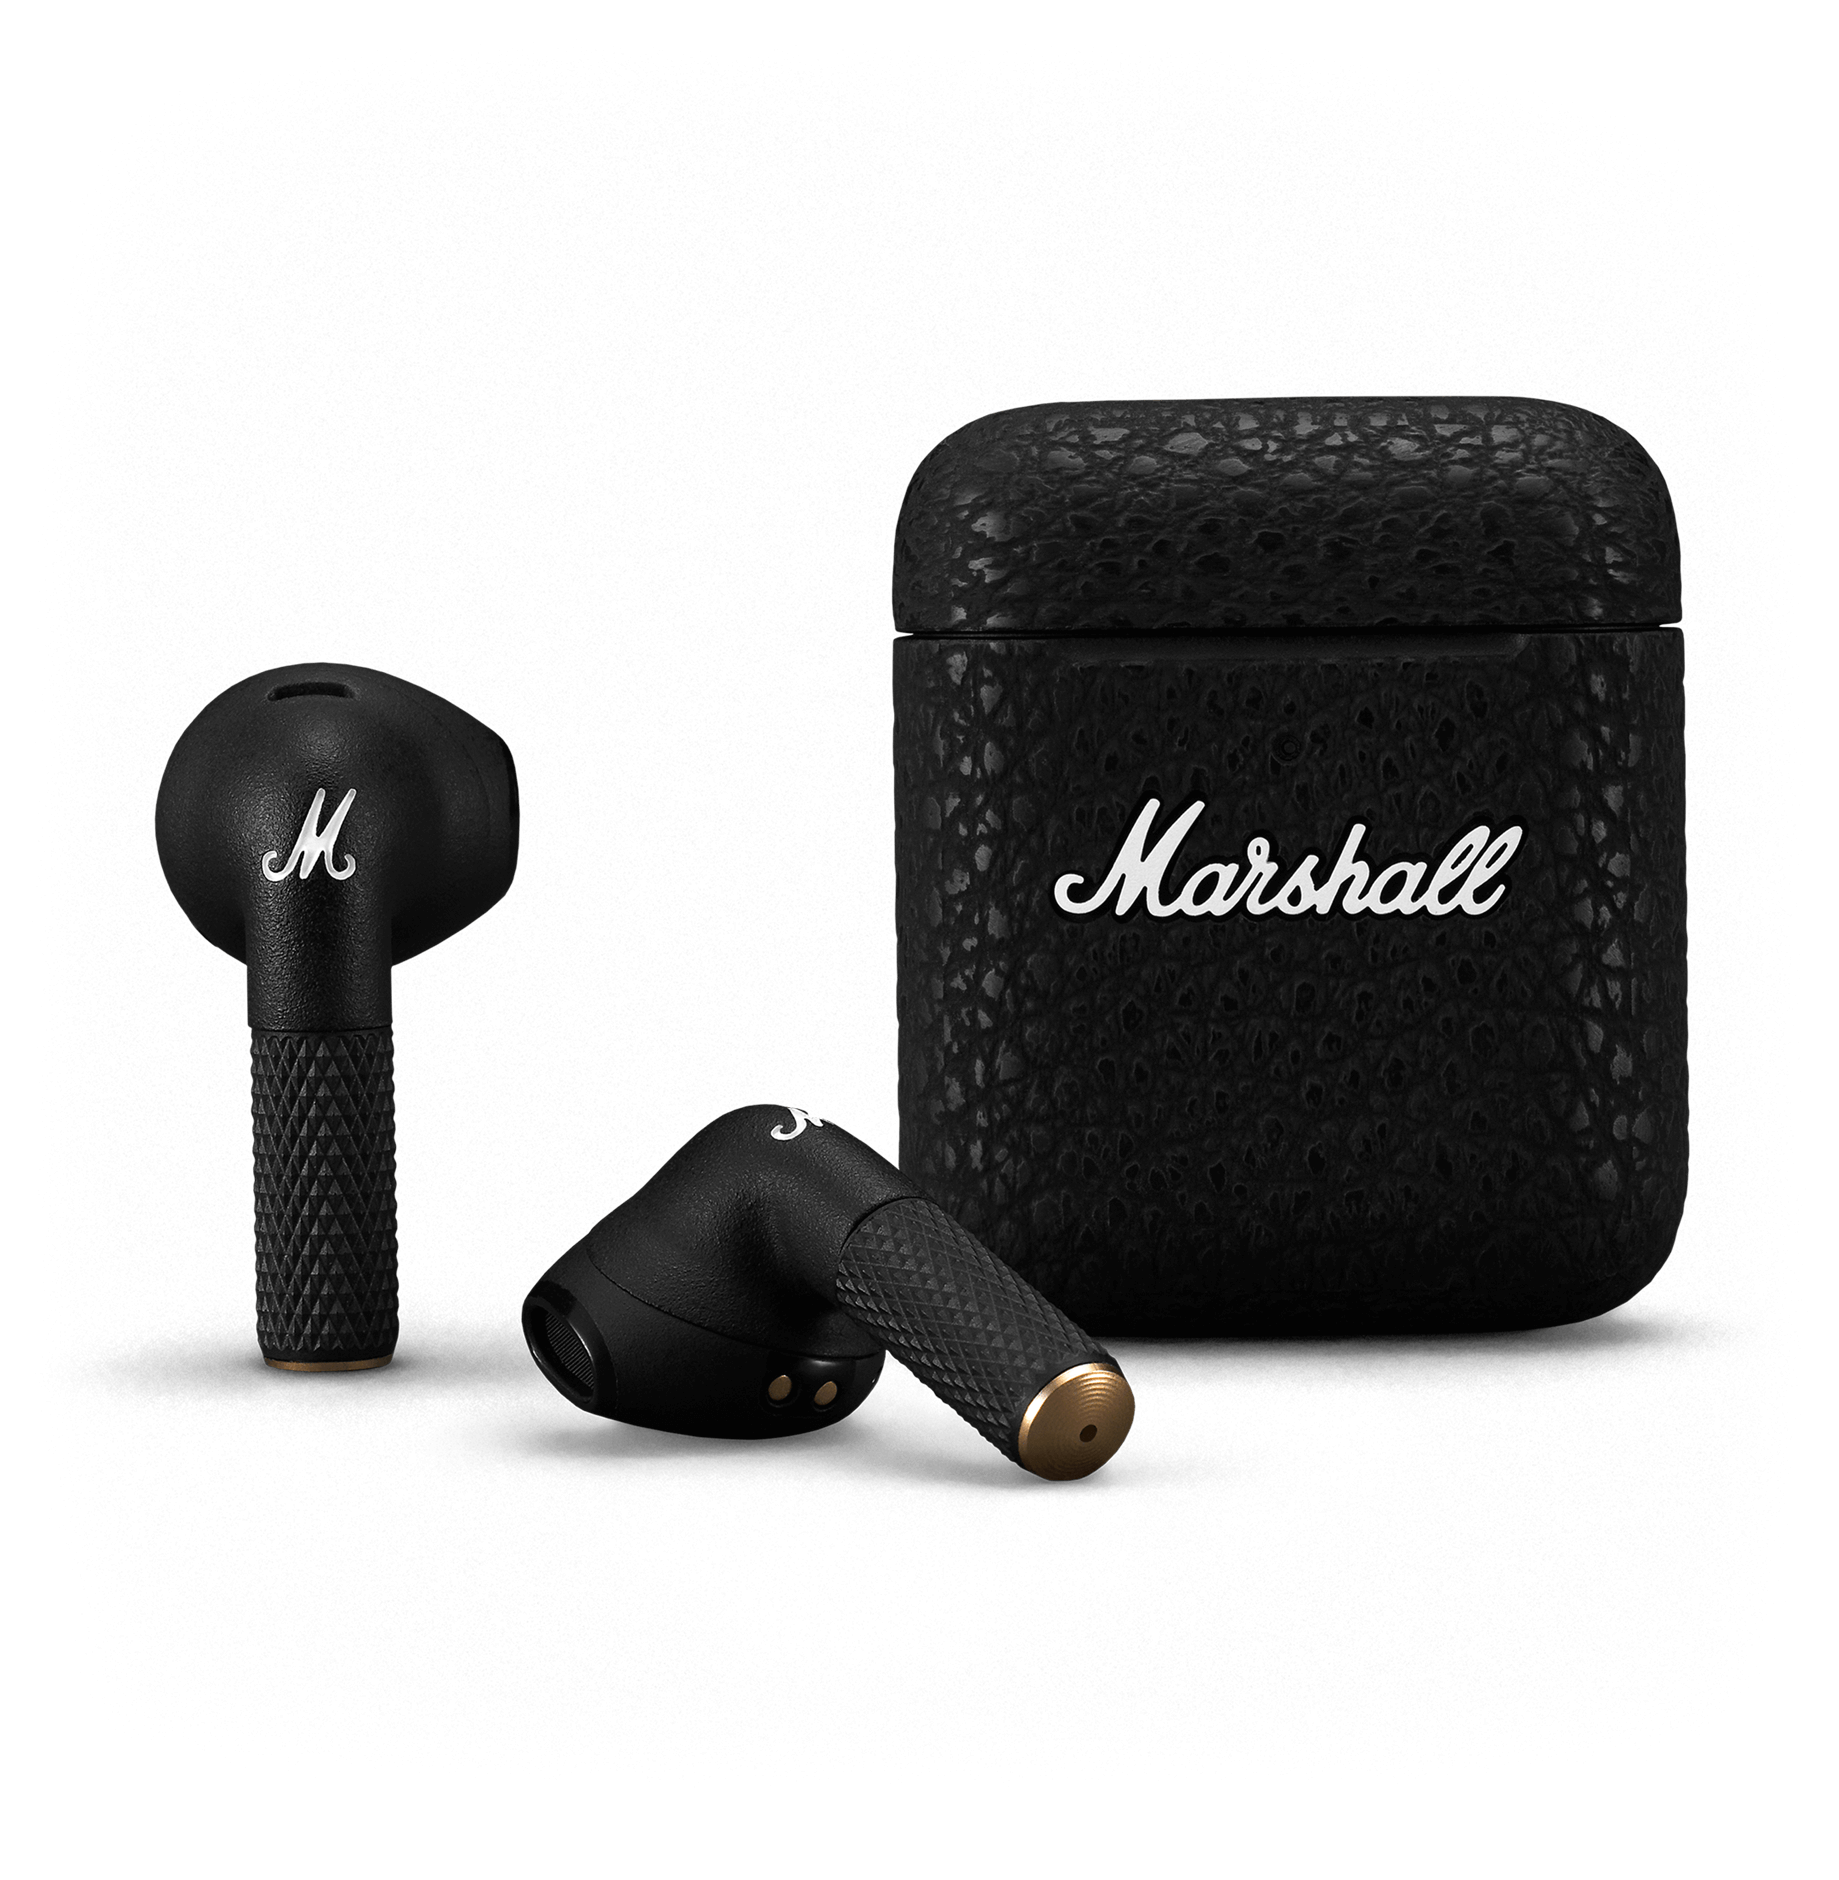 Marshall III charging Minor case | with earbuds